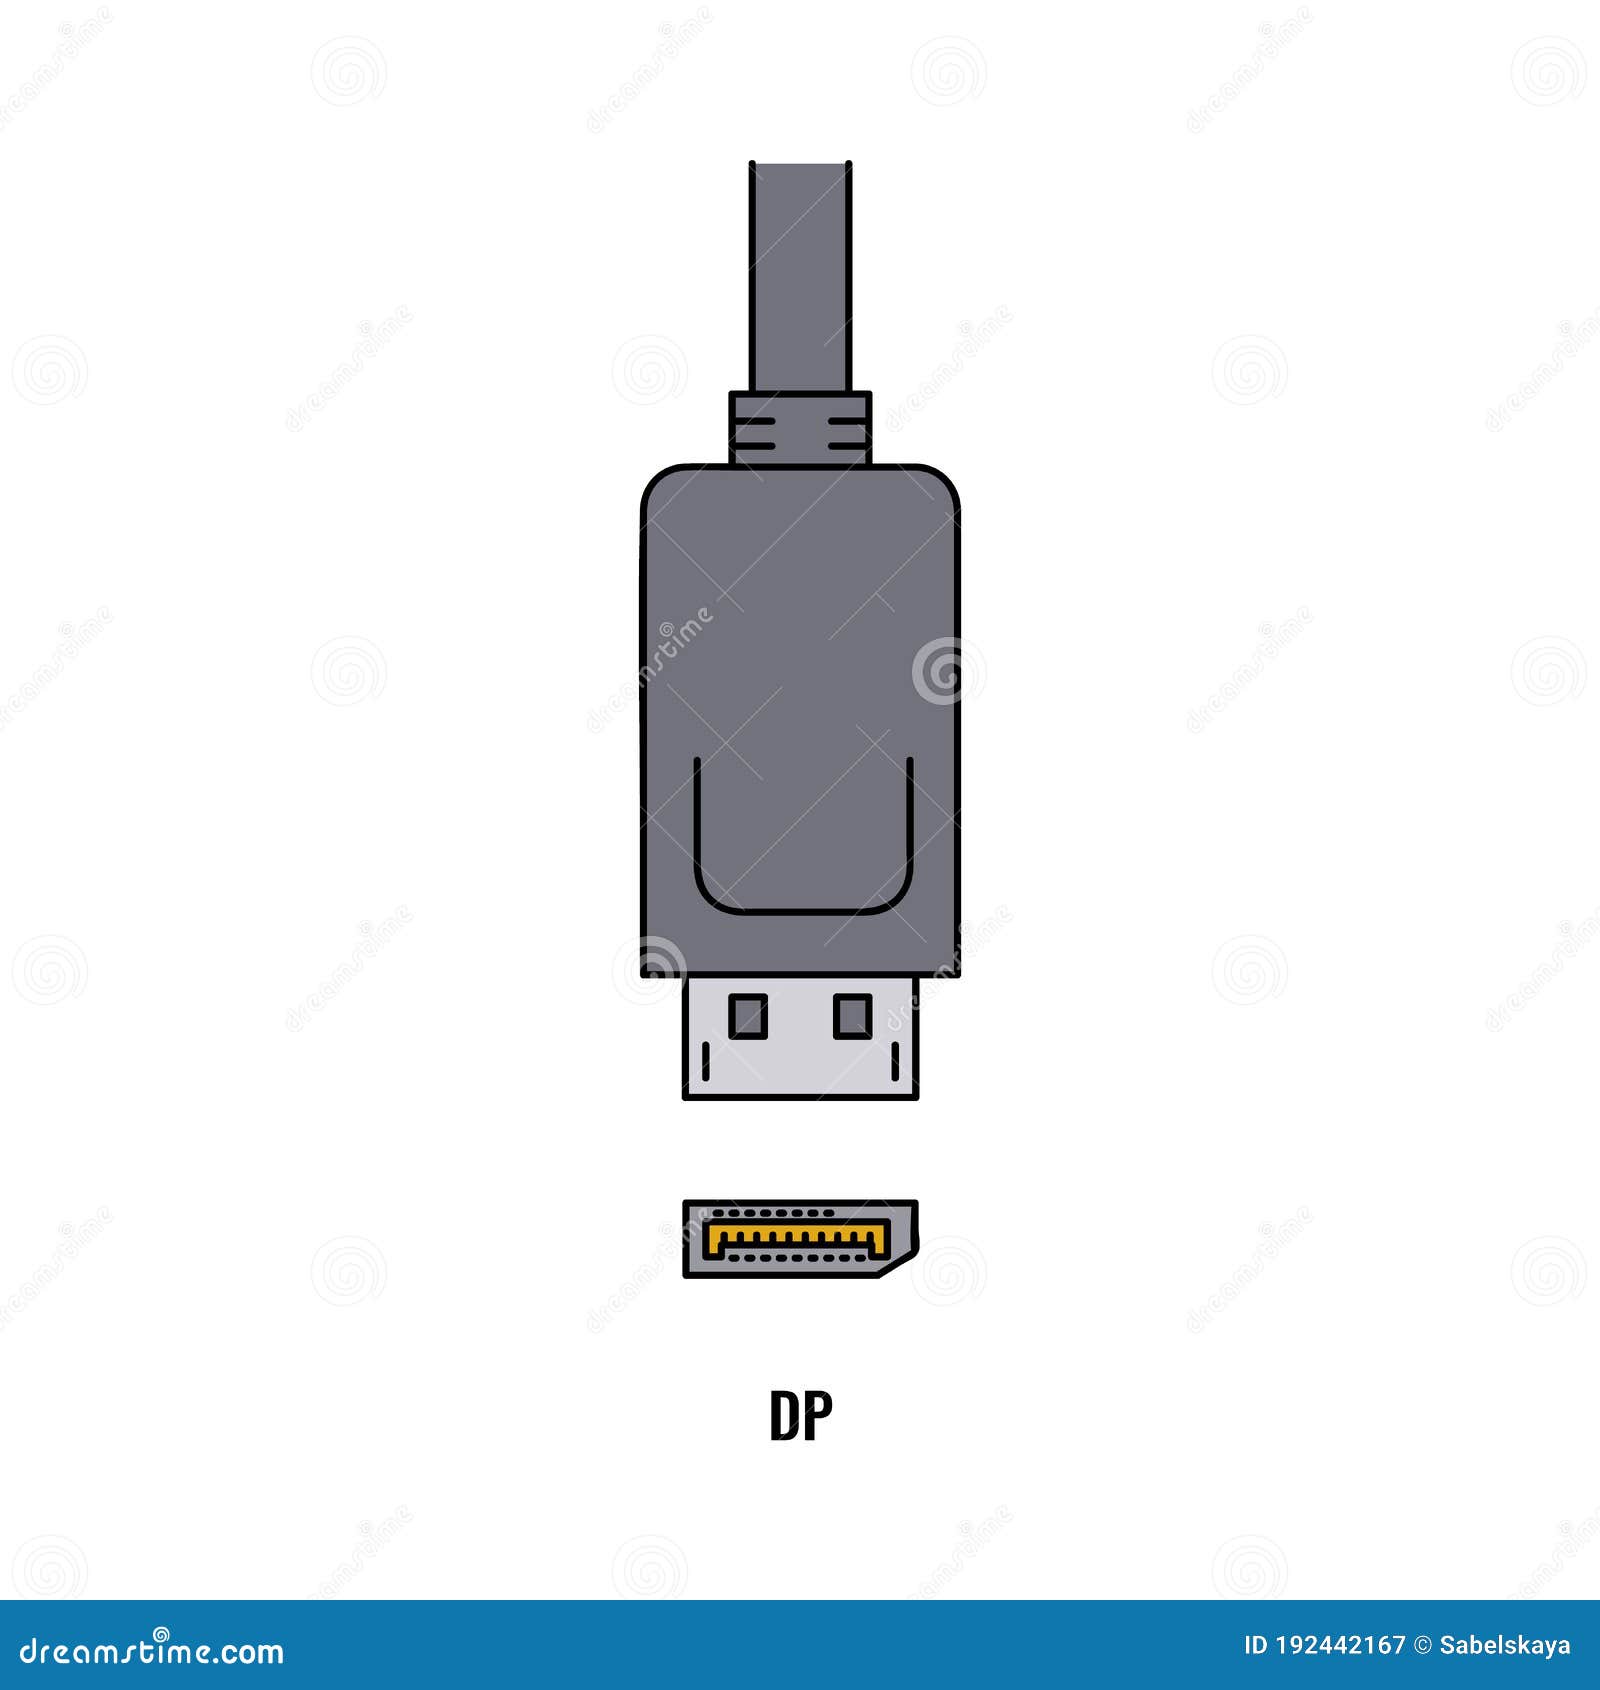 usb c  Finding the exterior dimensions of a USB typec receptacle   Electrical Engineering Stack Exchange